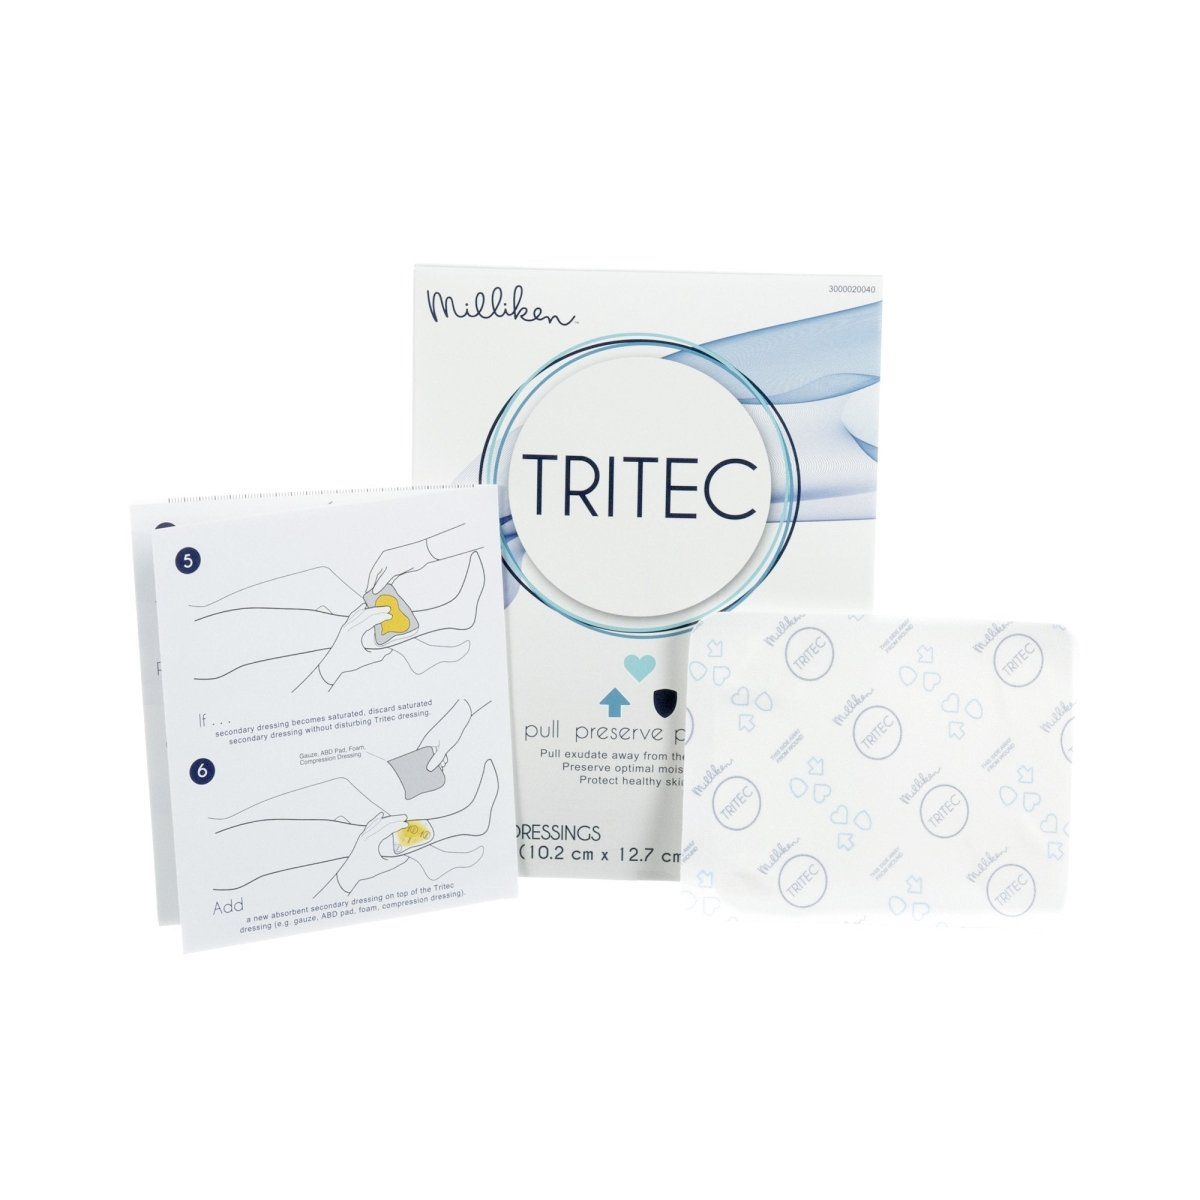 Tritec Contact Layer Wound Dressing - 794692_EA - 1